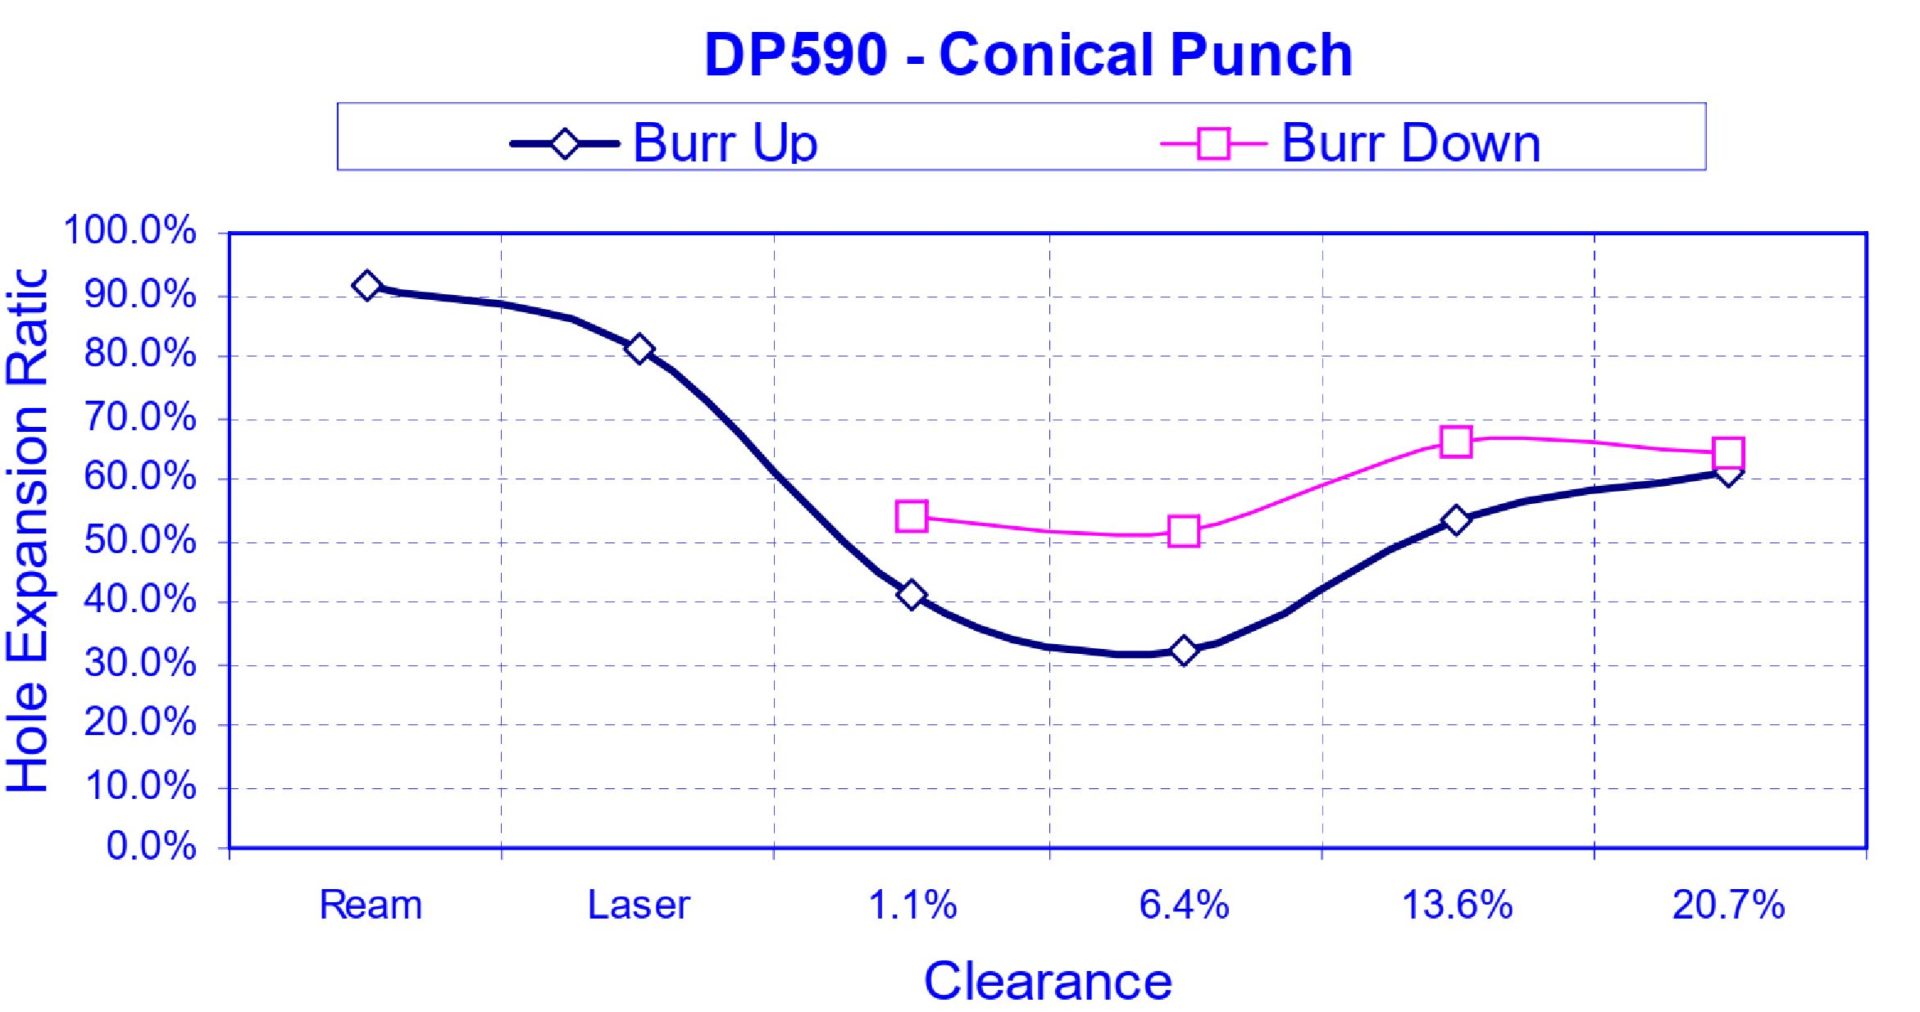 Figure 8: The Effect of Burr Orientation on Hole Expansion as a Function of Clearance on DP590. “Burr Up” means away from the punch; “Burr Down” means in contact with the punch.K-10